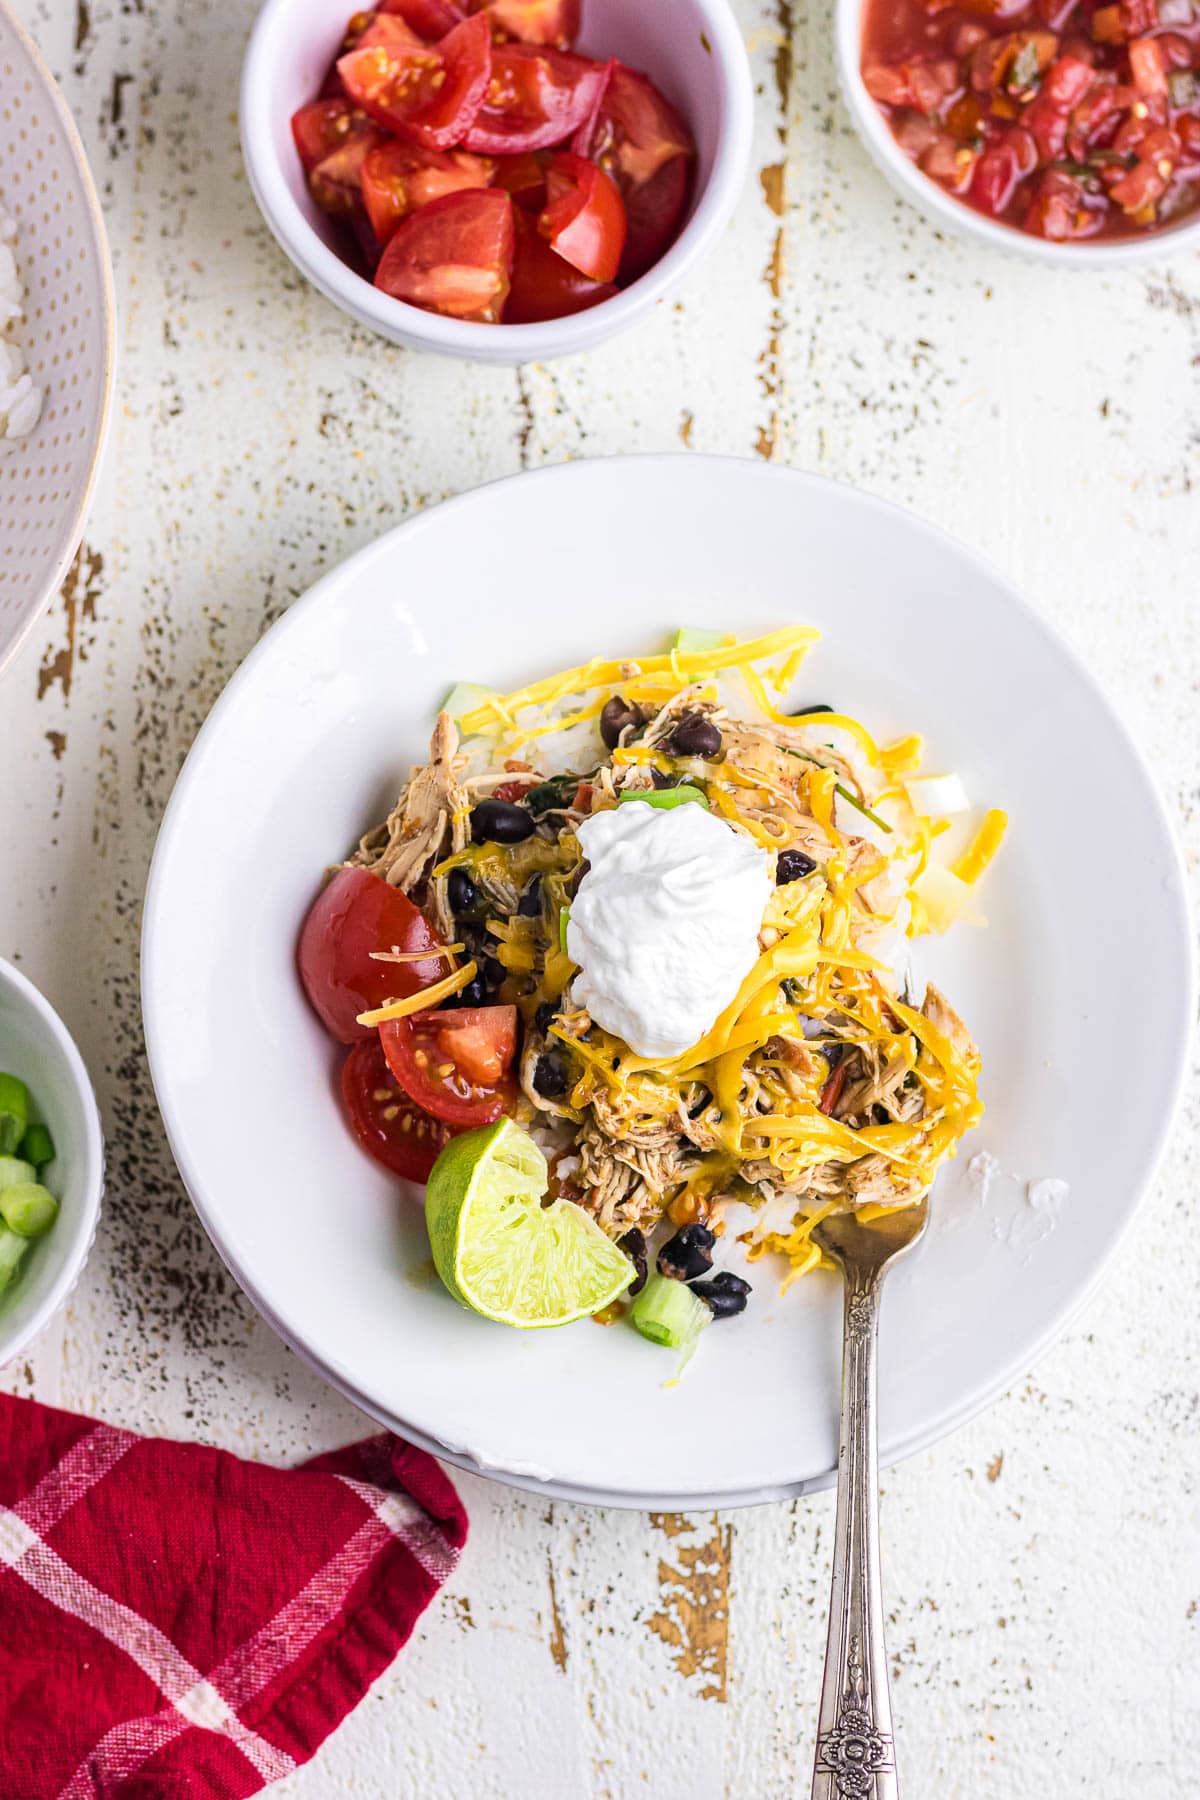 A chicken burrito bowl topped with cheese and sour cream.